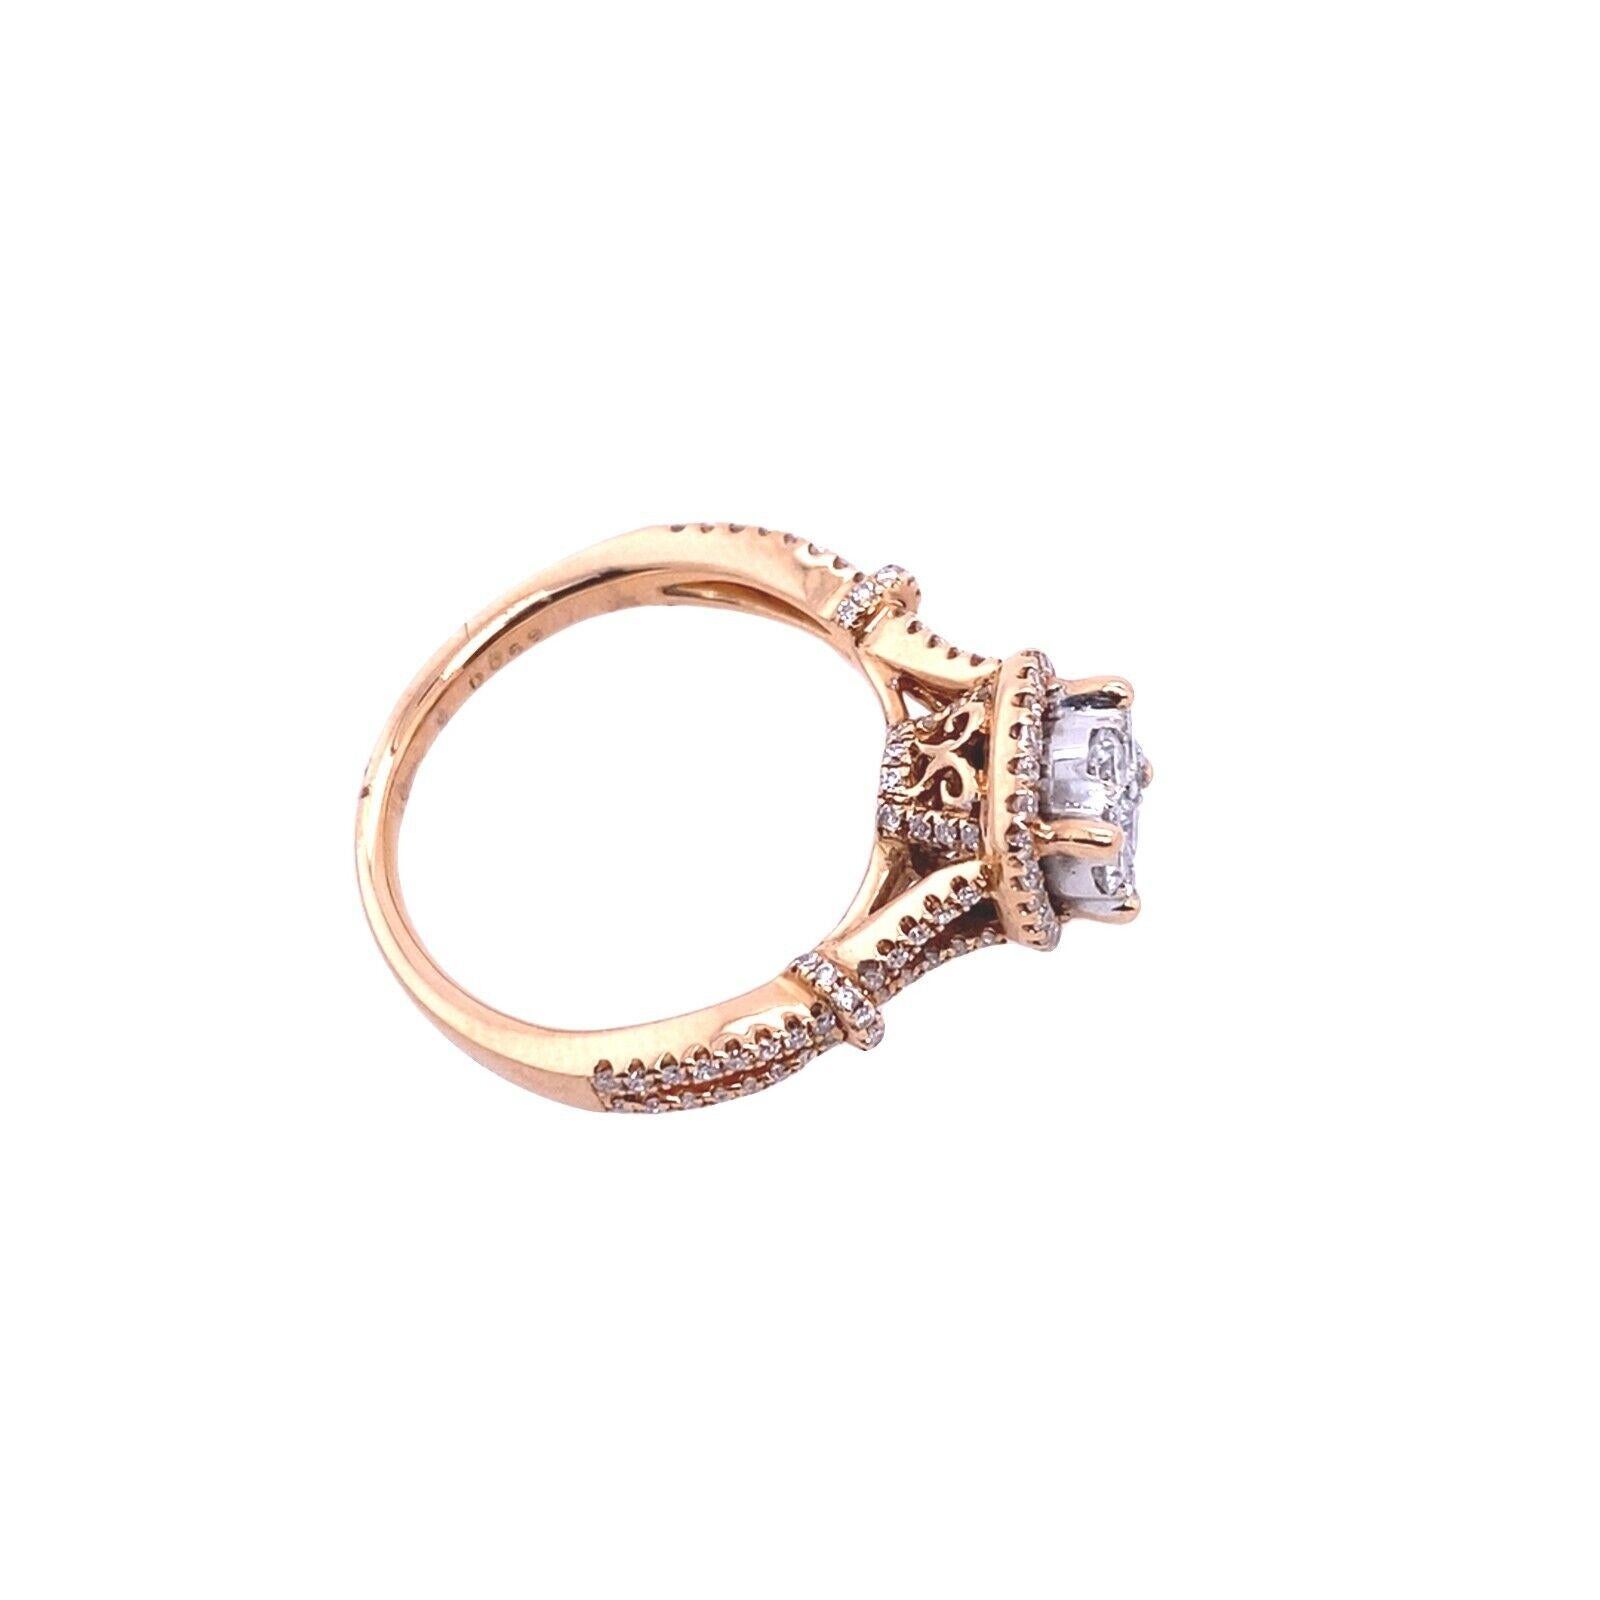 Fine Quality Engagement Ring Set with 0.69ct of G VS Diamonds in 18ct Rose Gold In Excellent Condition For Sale In London, GB